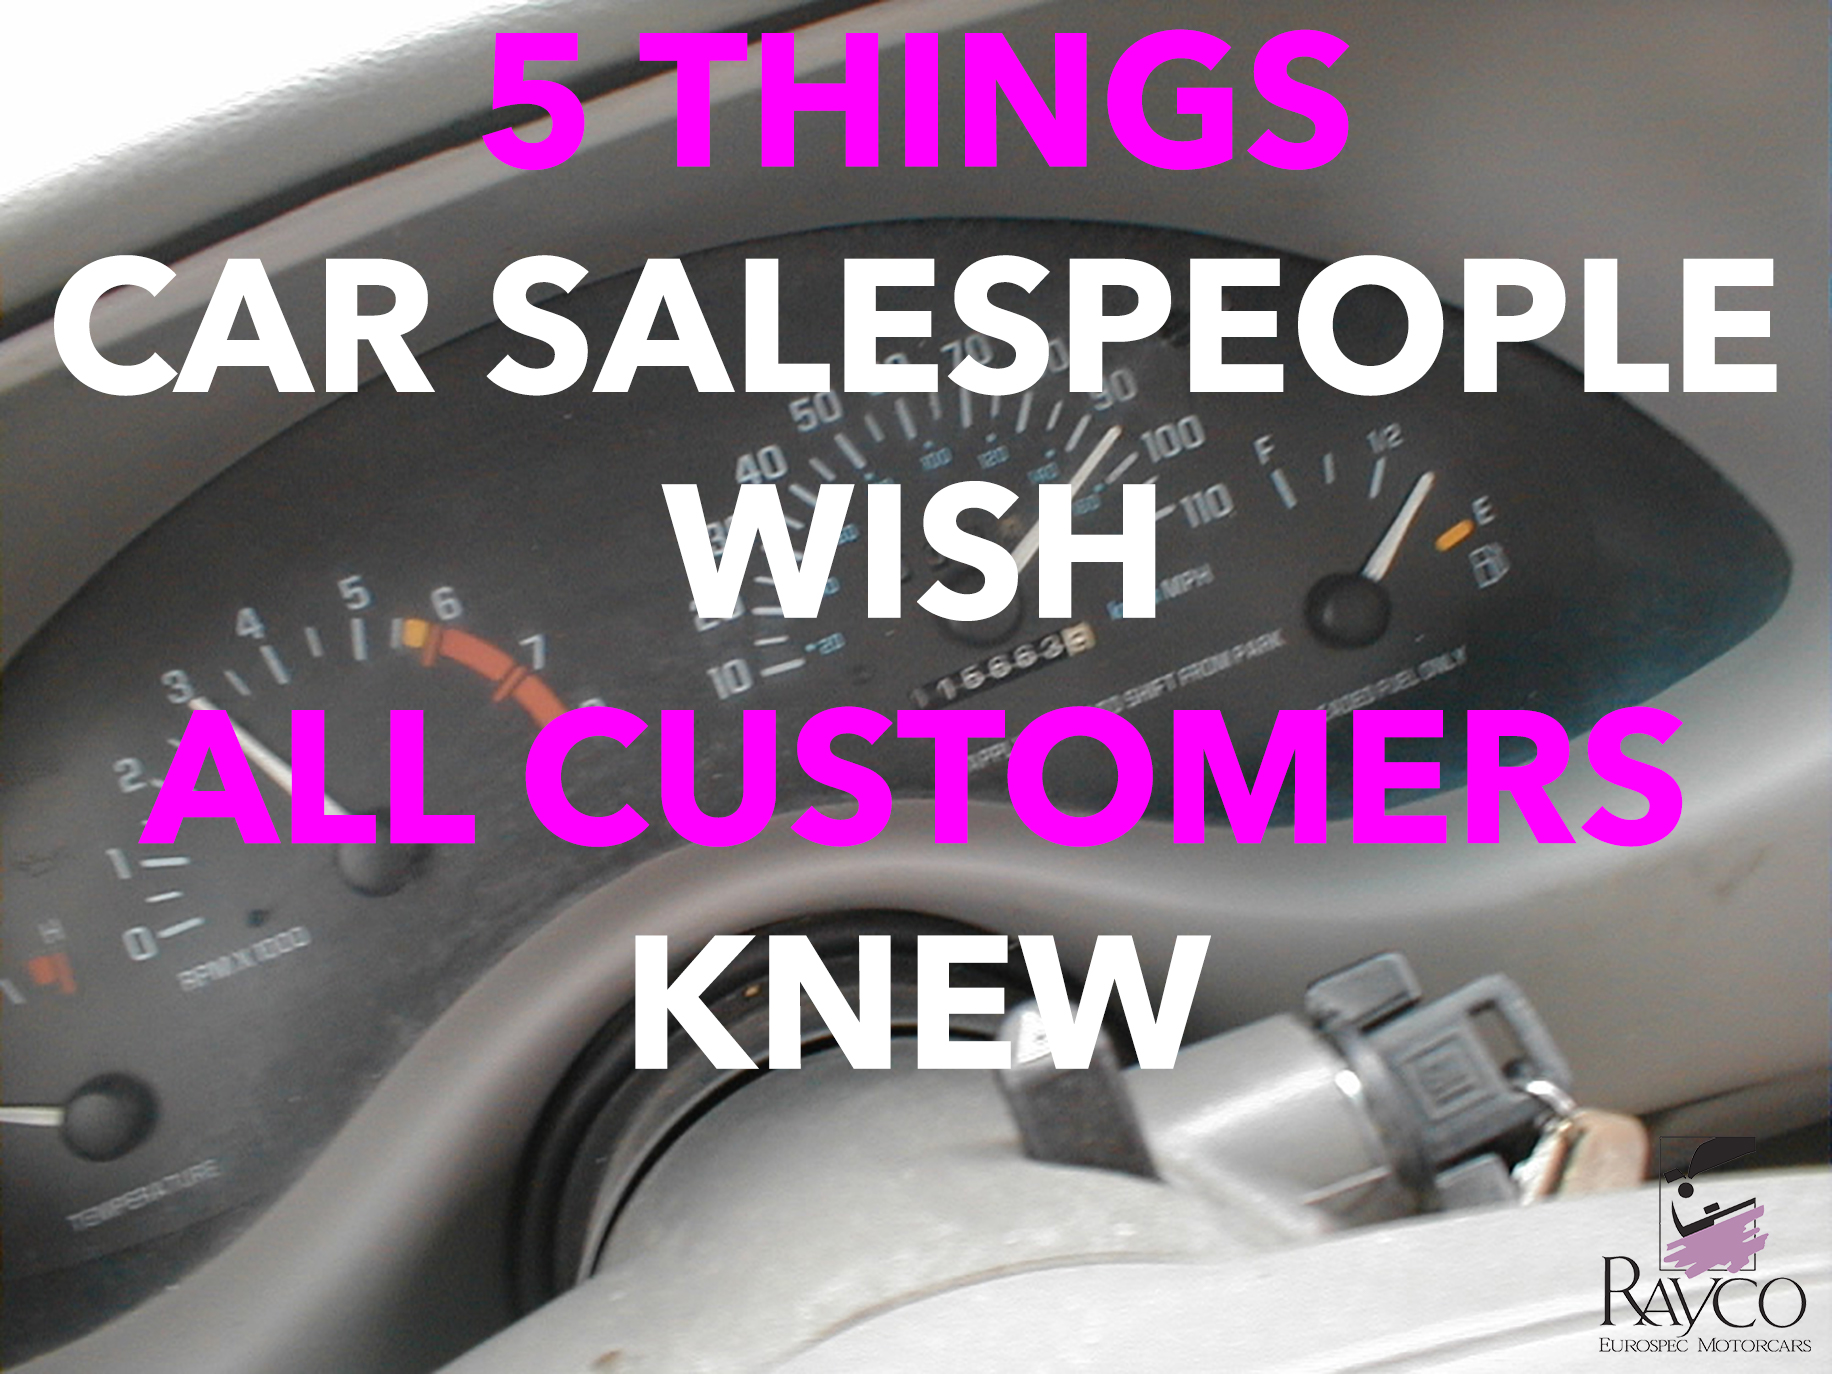 5 Things Car Salespeople Wish All Customers Knew